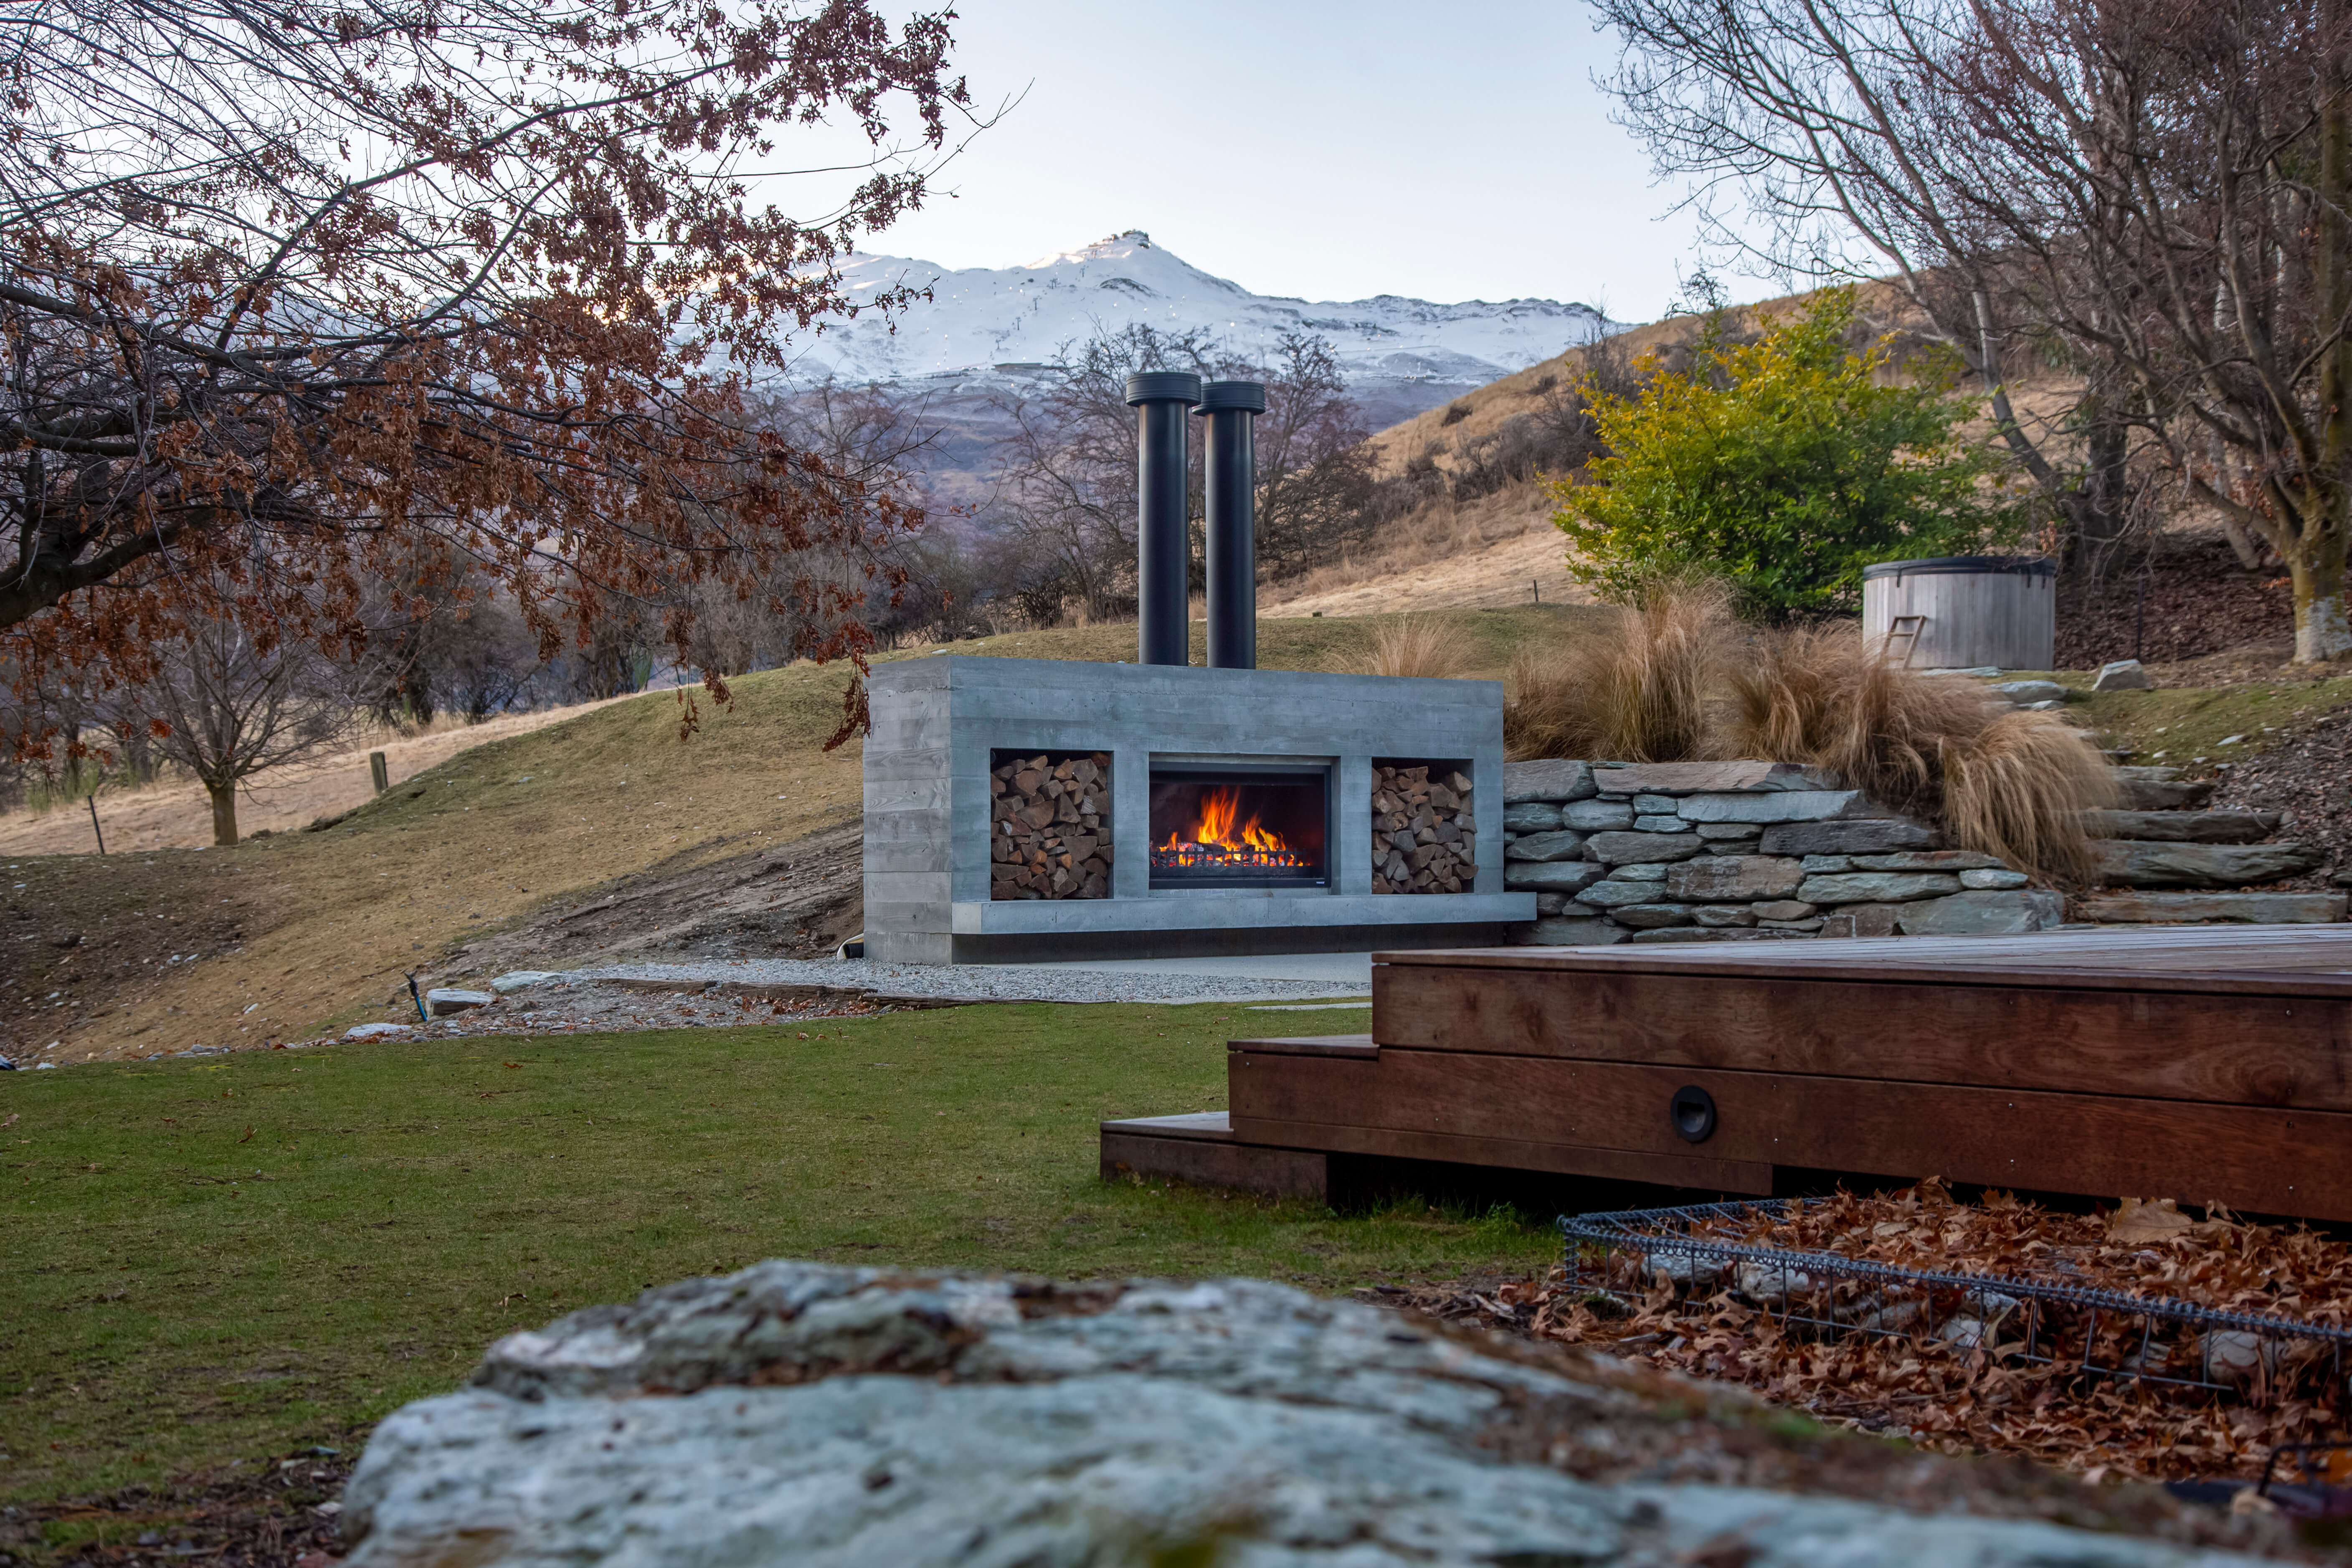 How customisable is an outdoor fireplace?